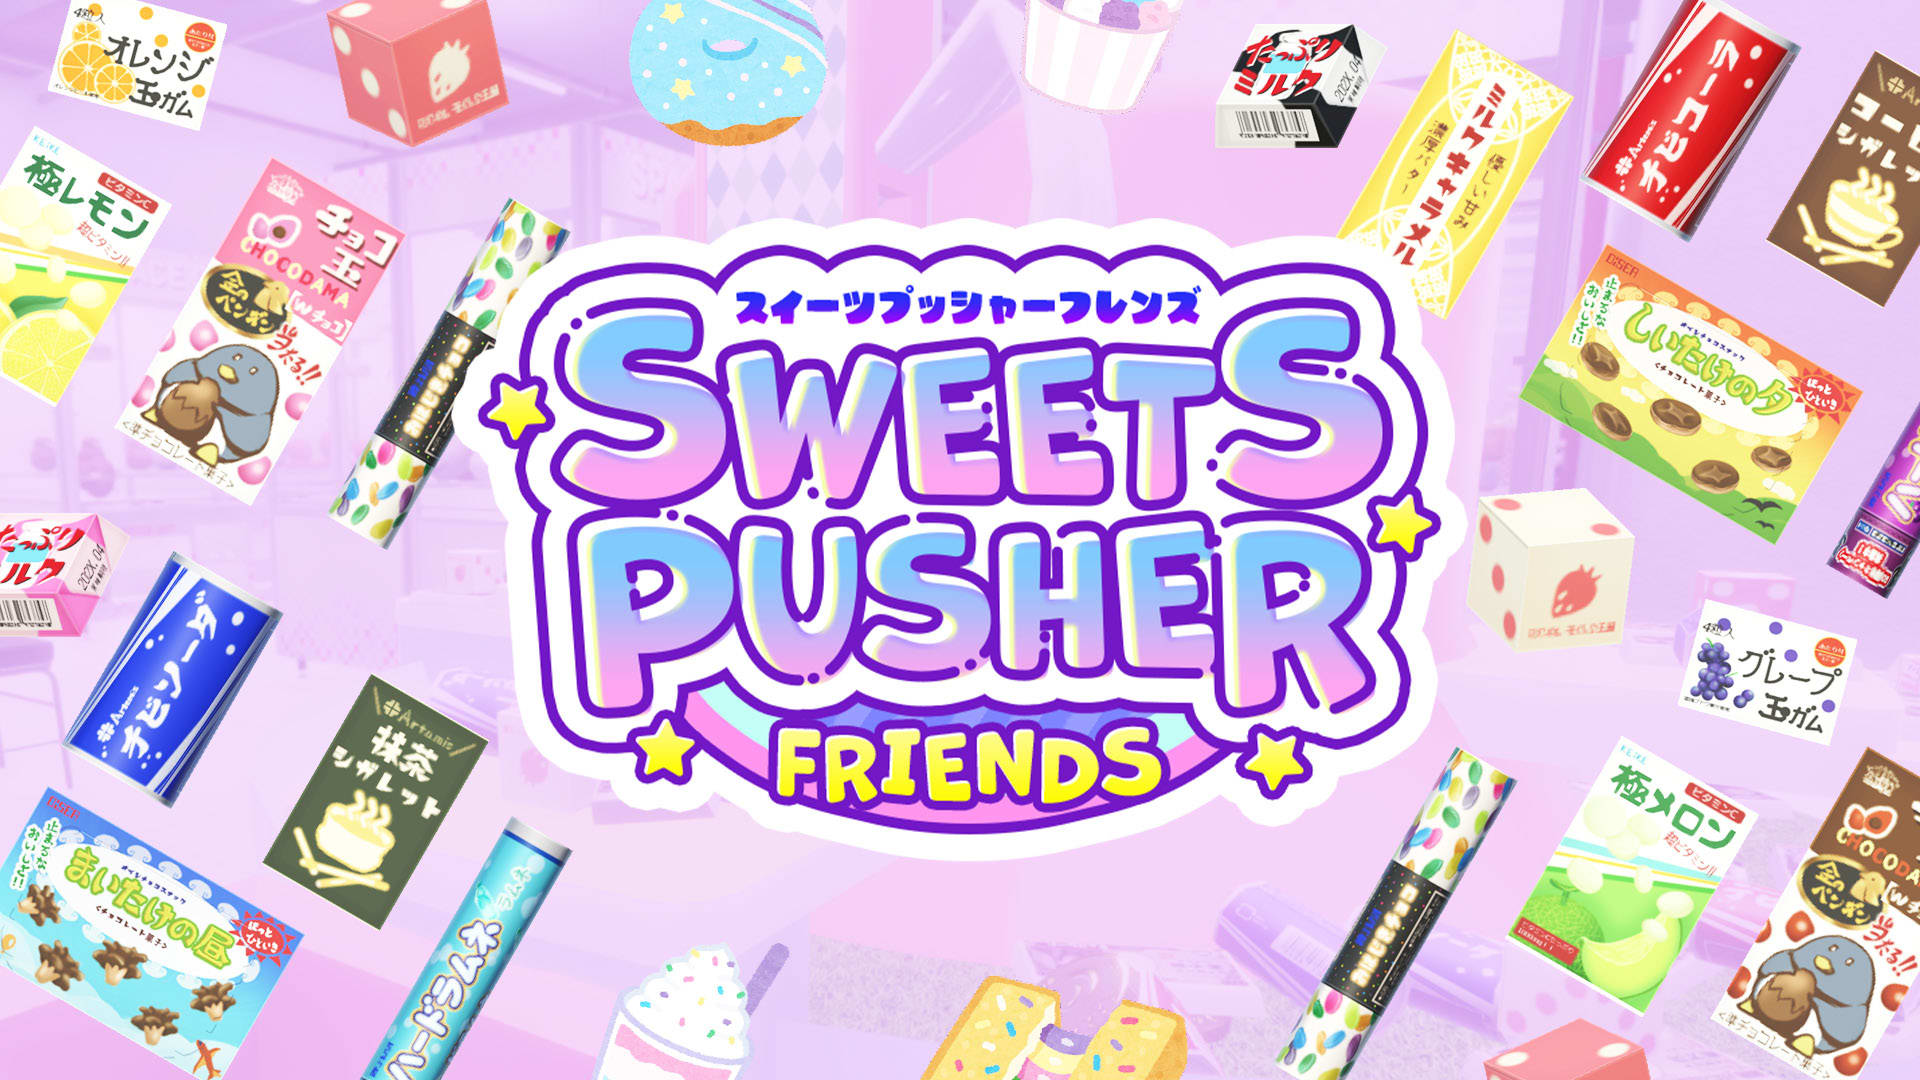 Sweets Pusher Friends